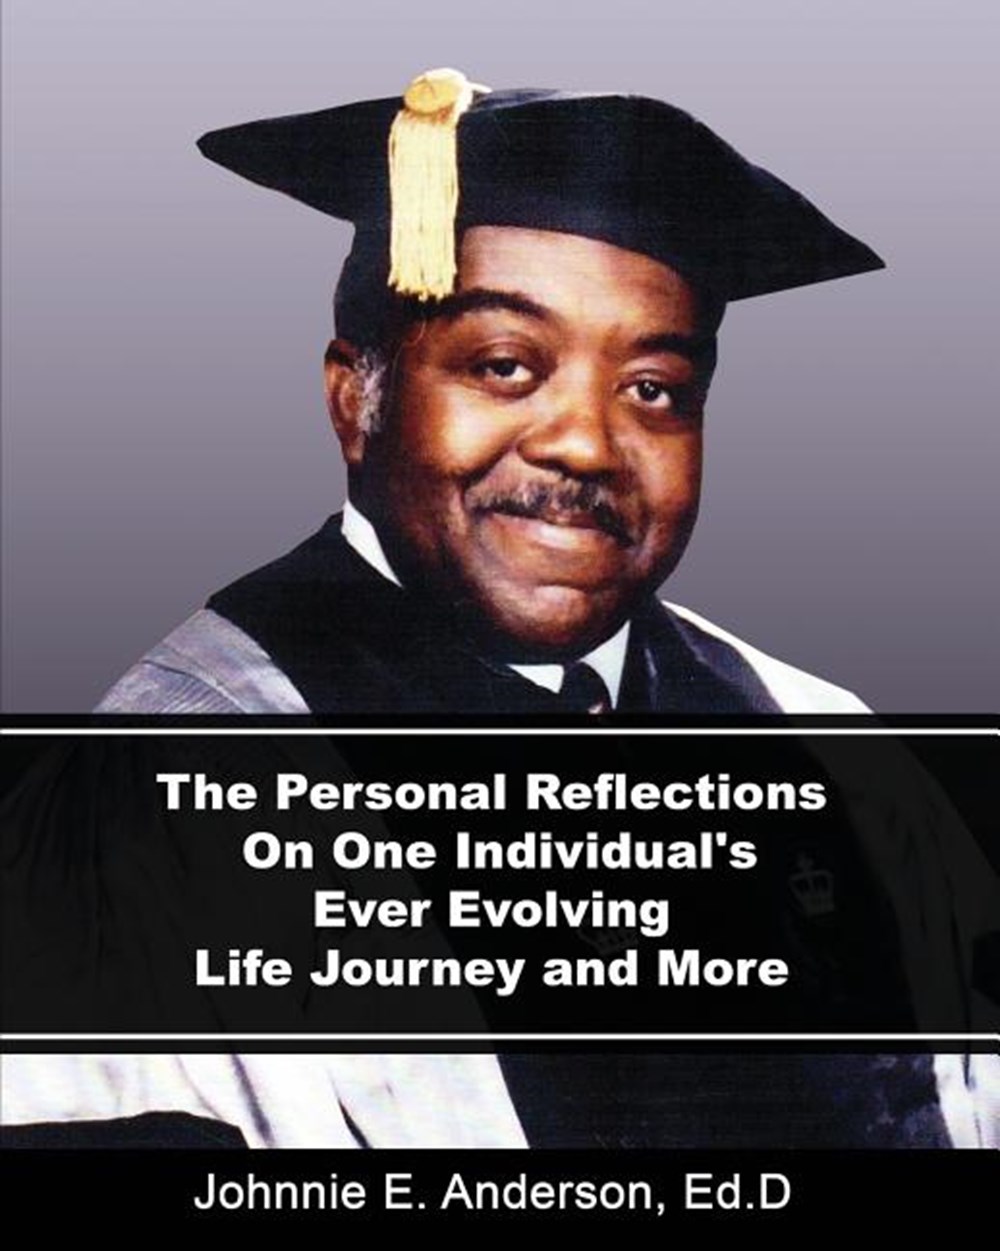 Personal Reflections On One Individual's Ever Evolving Life Journey and More (The Book Is an In-Dept